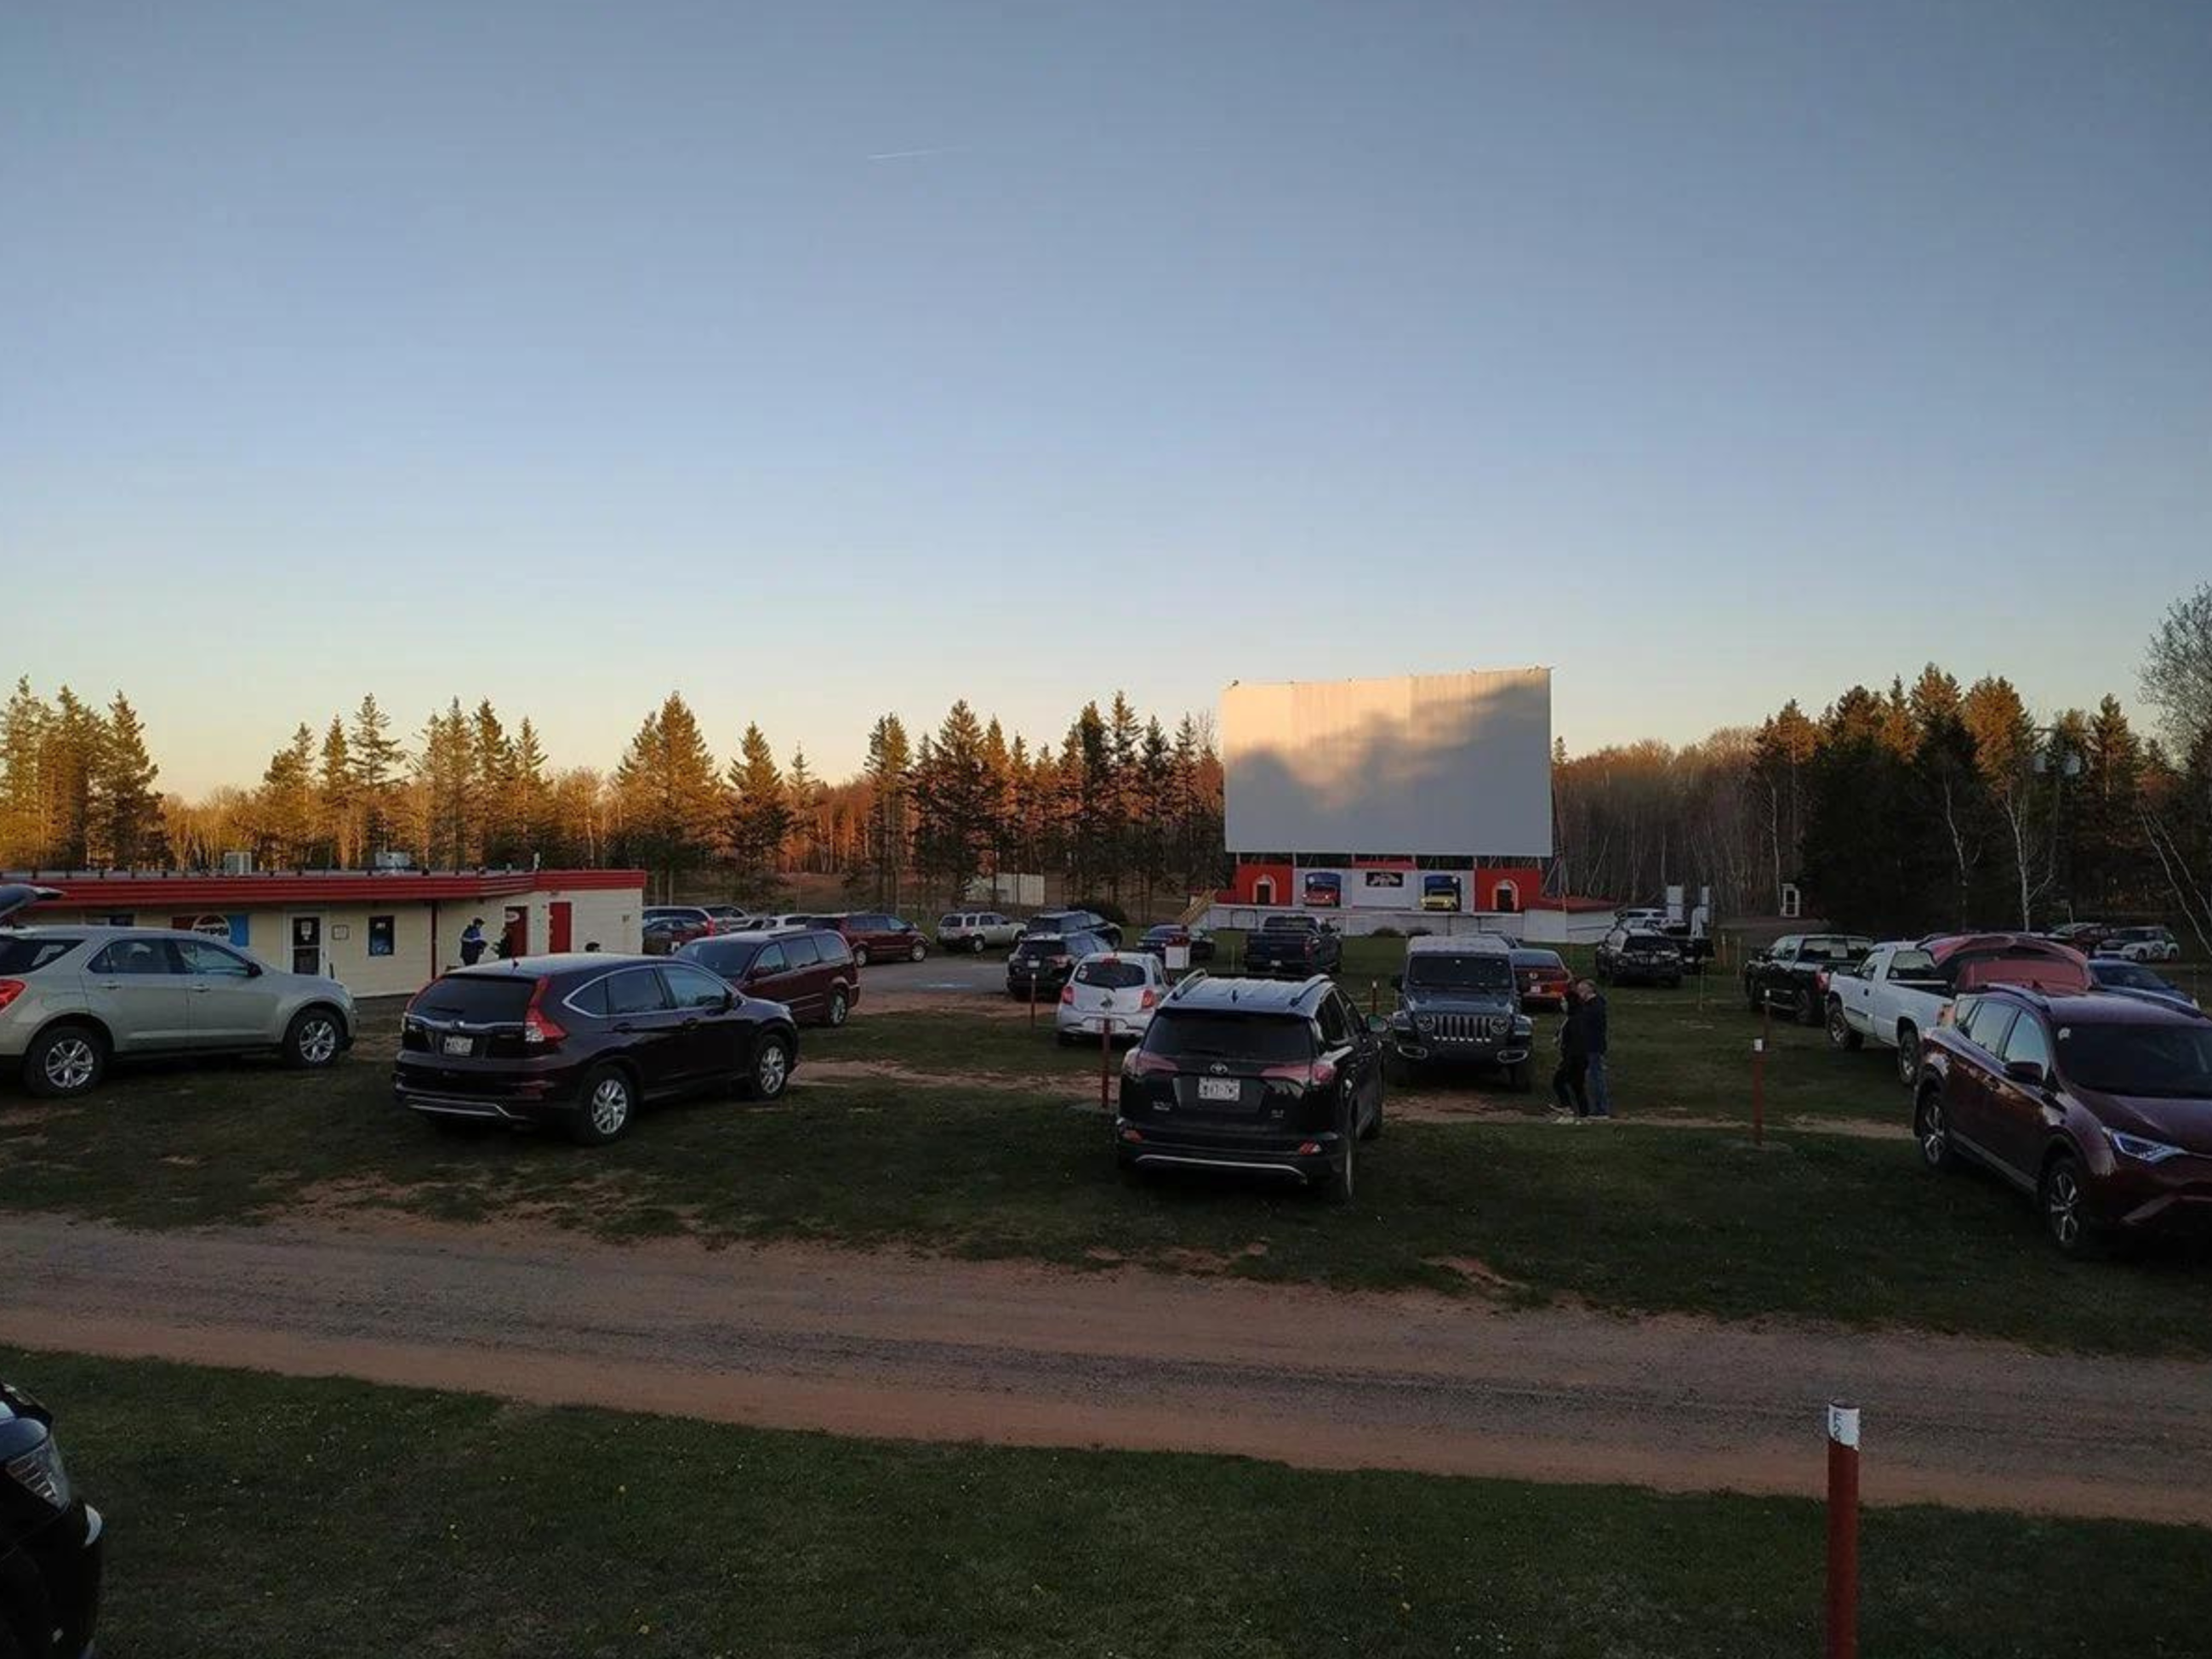 Thriving At The Drive-In: Our Tips For Making The Most Of Movie Night